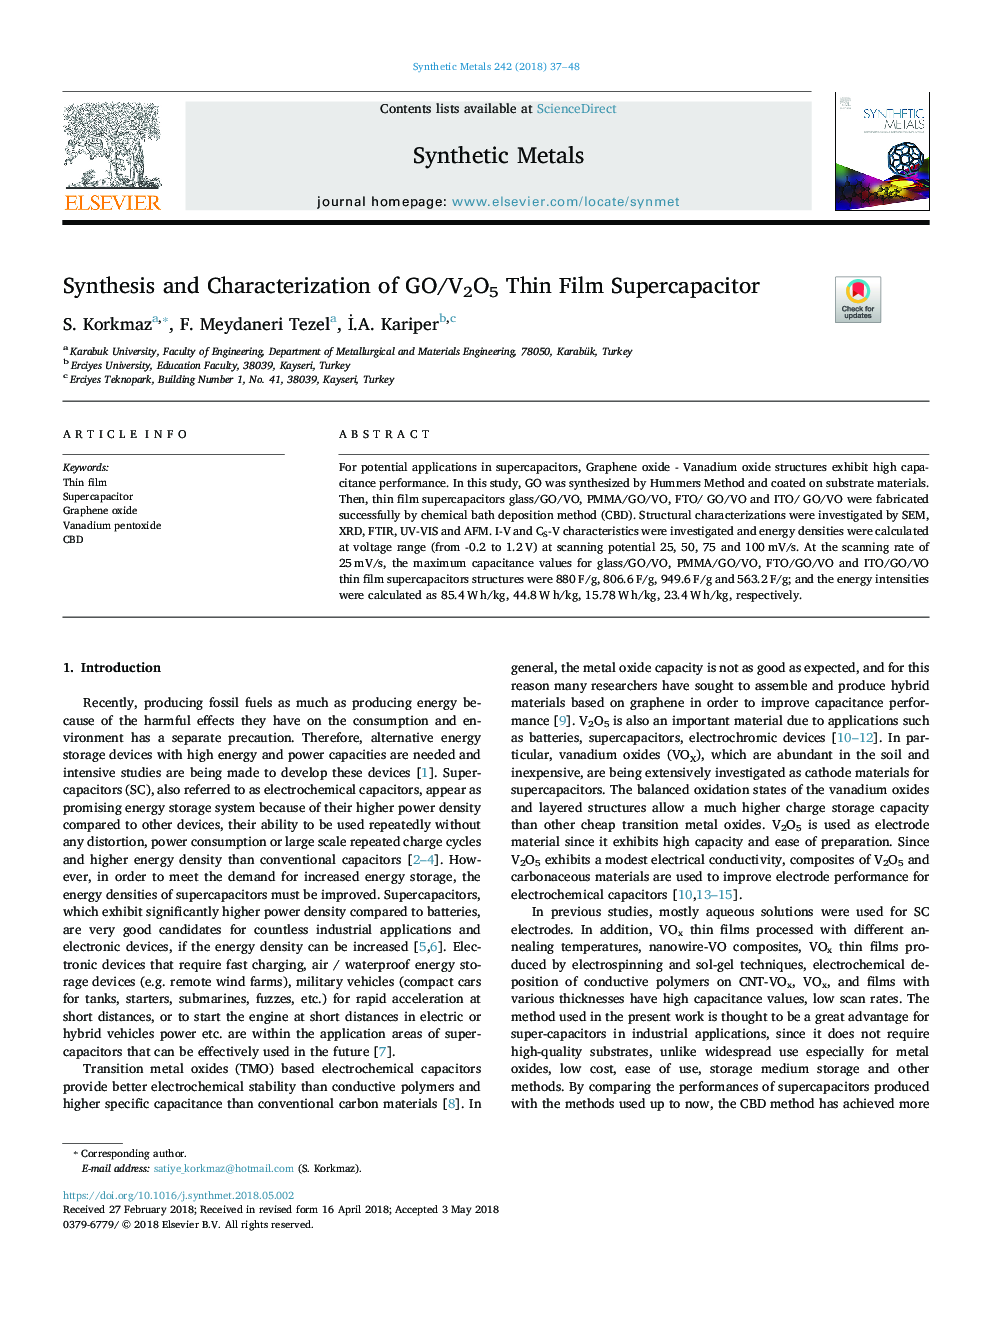 Synthesis and Characterization of GO/V2O5 Thin Film Supercapacitor